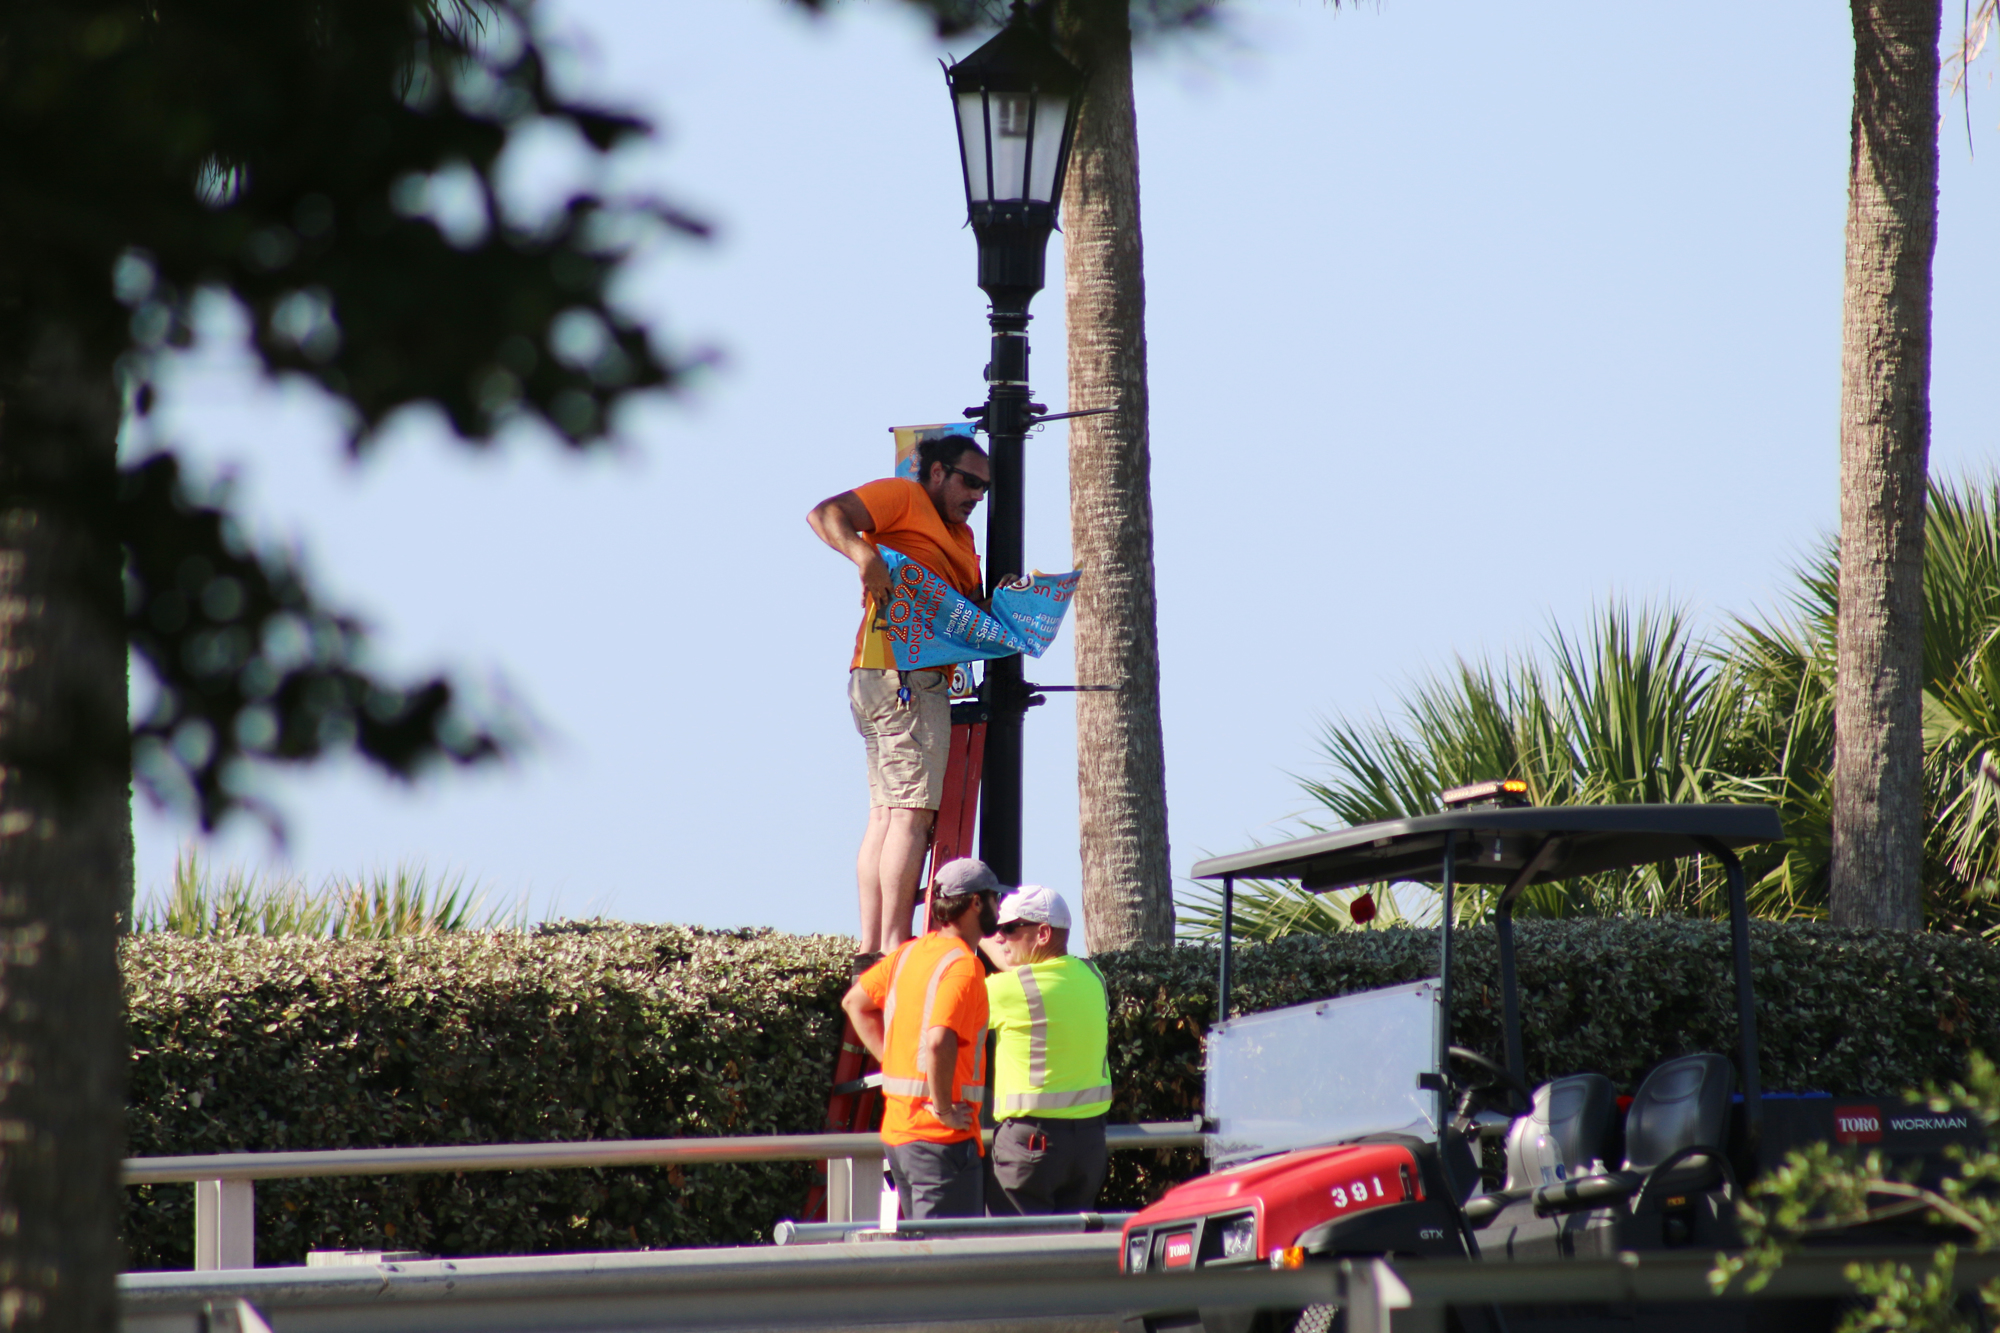 Ormond Beach Public Works employees put up the banners on Friday, May 22. Photo by Jarleene Almenas